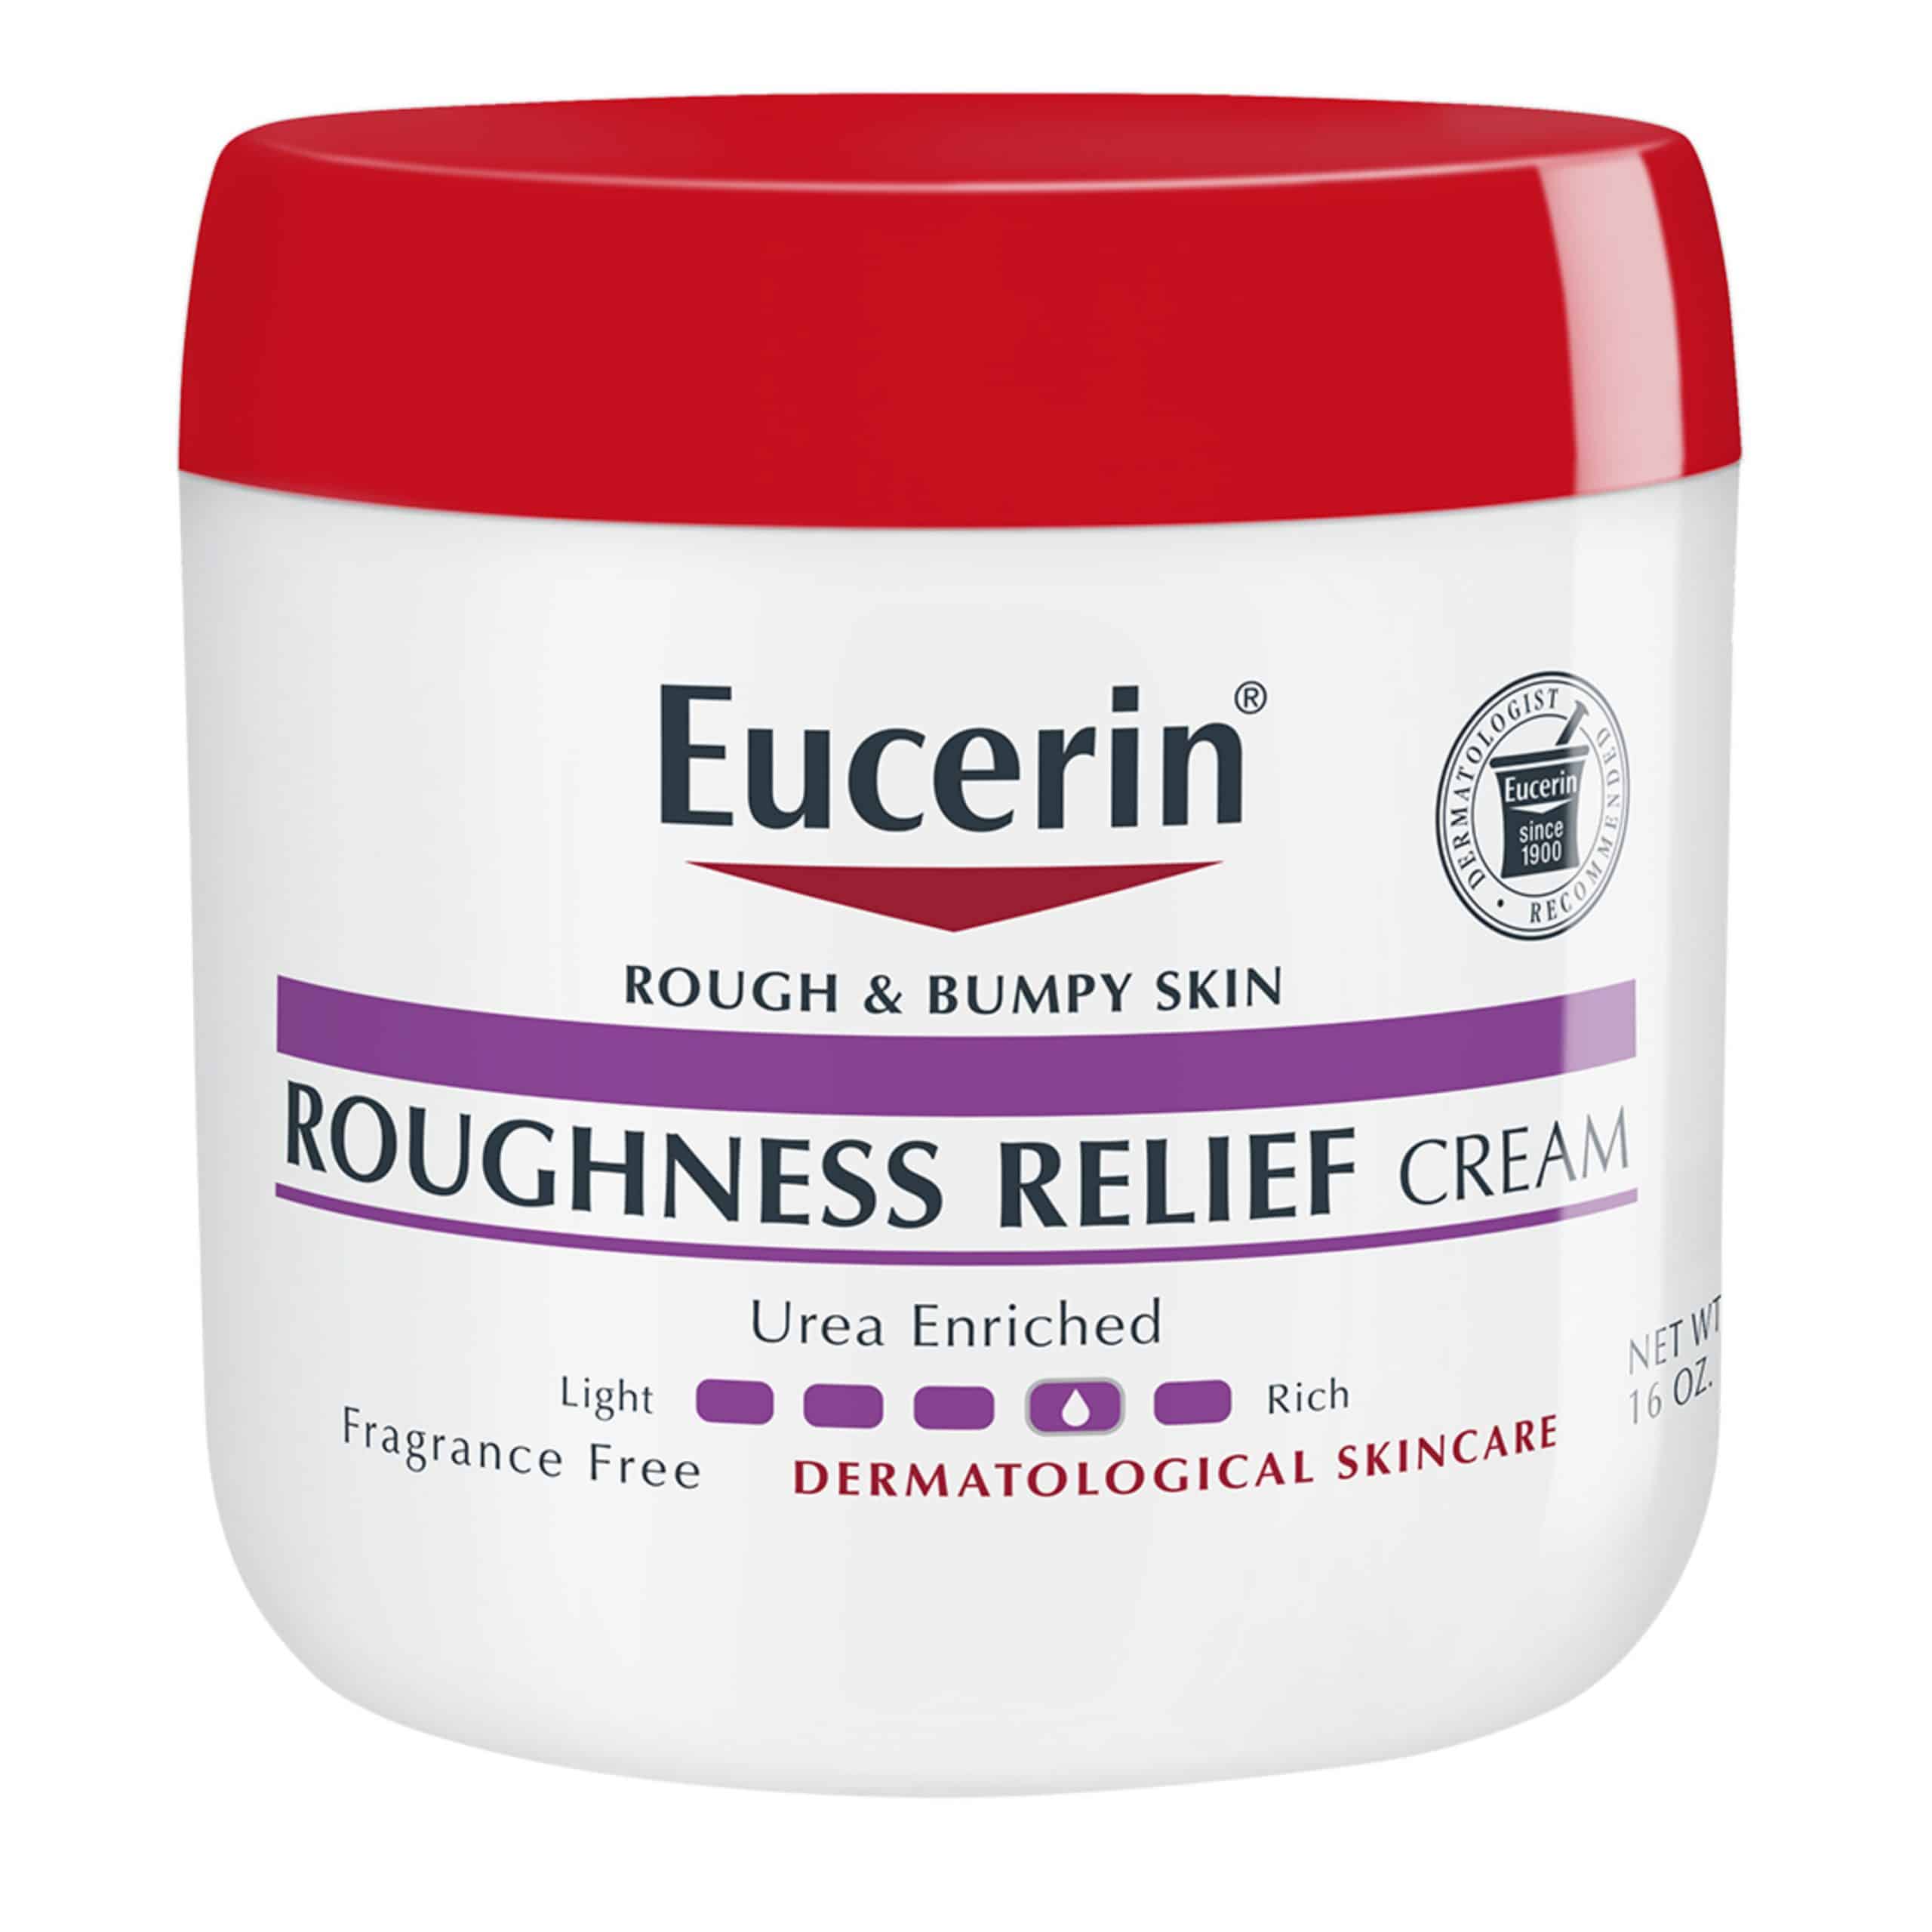 Eucerin Roughness Relief Cream, Body Lotion For Rough and Bumpy Skin ...